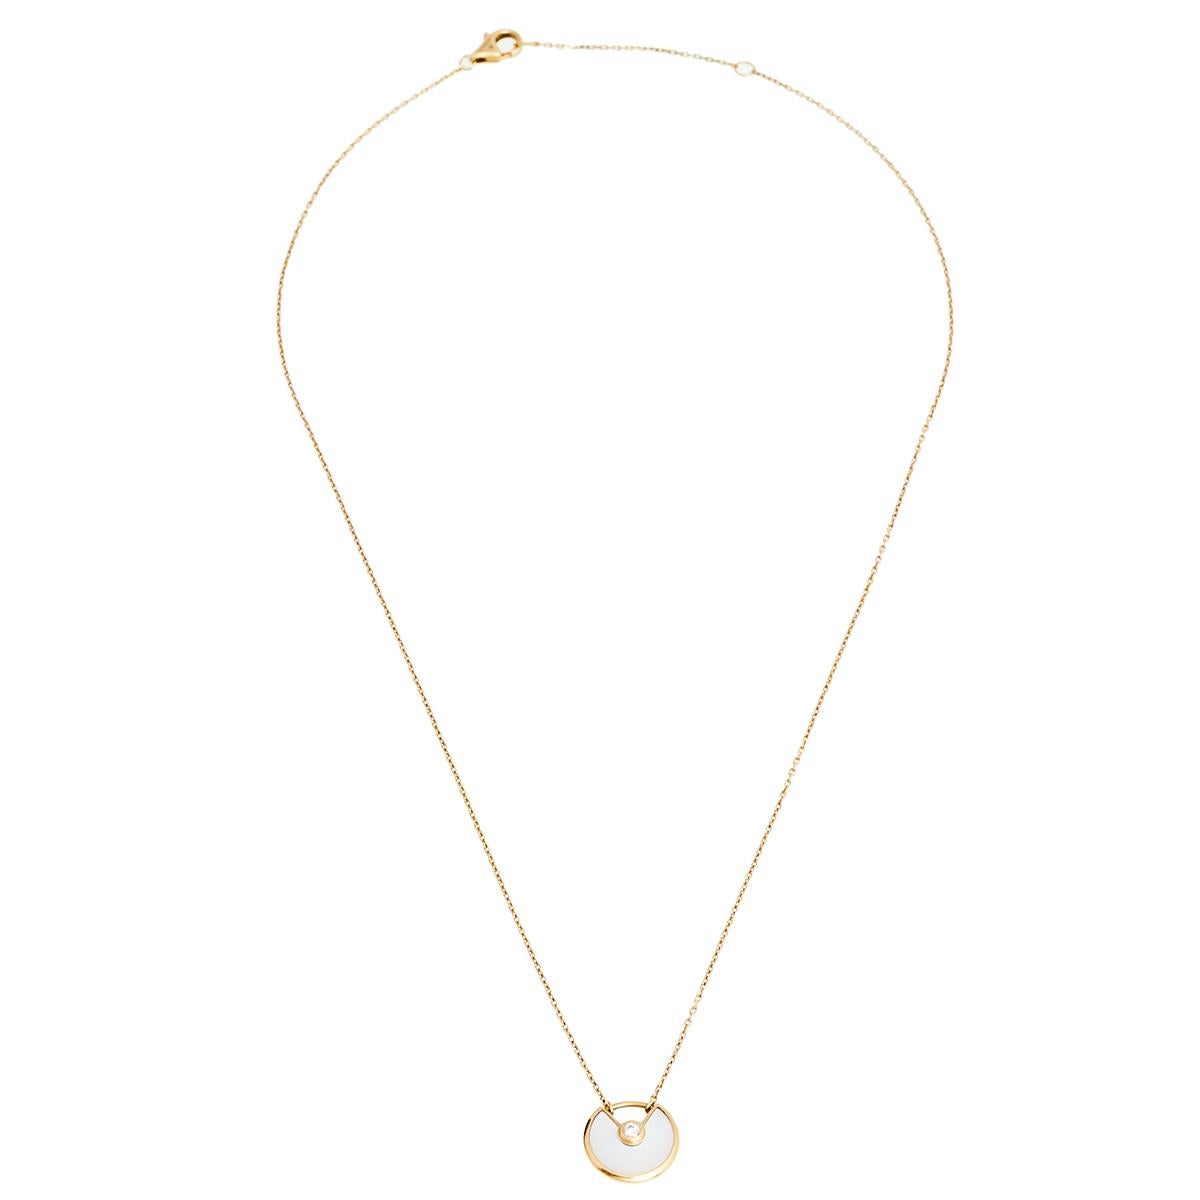 This necklace by Cartier is so pretty, it won't just make you look good but you'll also love having it around your neck. The exquisite creation is from their Amulette de Cartier collection. It is crafted from 18k yellow gold and adorned with a round